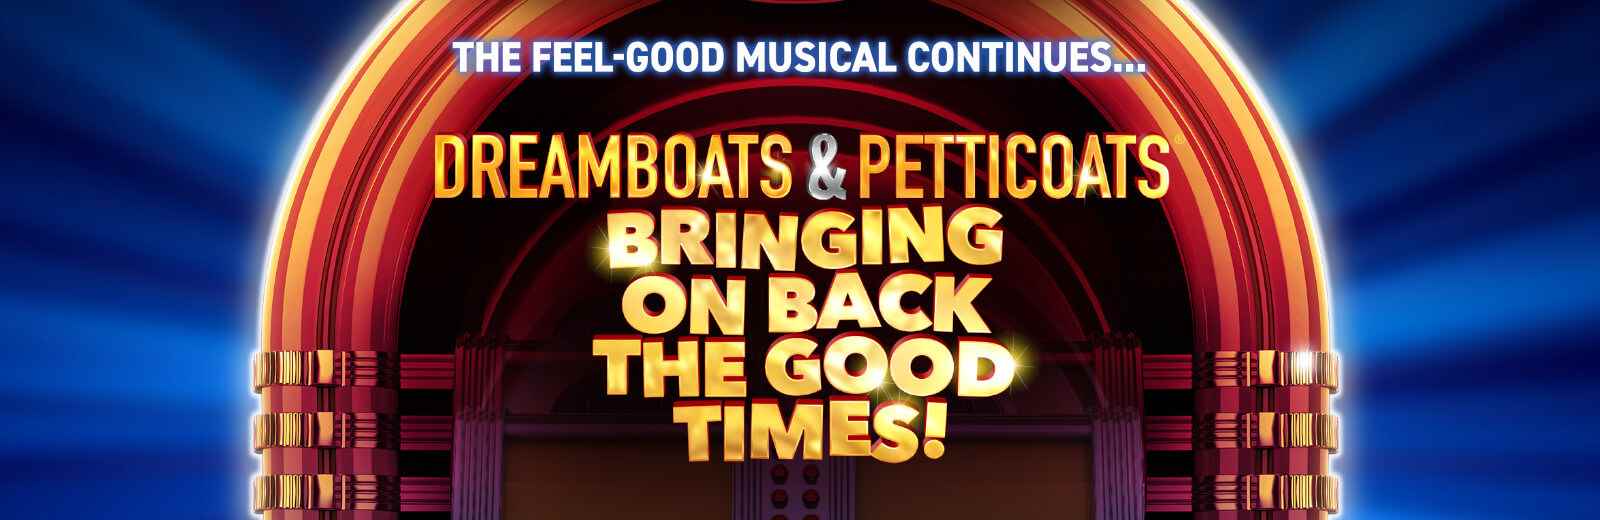 Touch tour for the visually impaired: Dreamboats & Petticoats